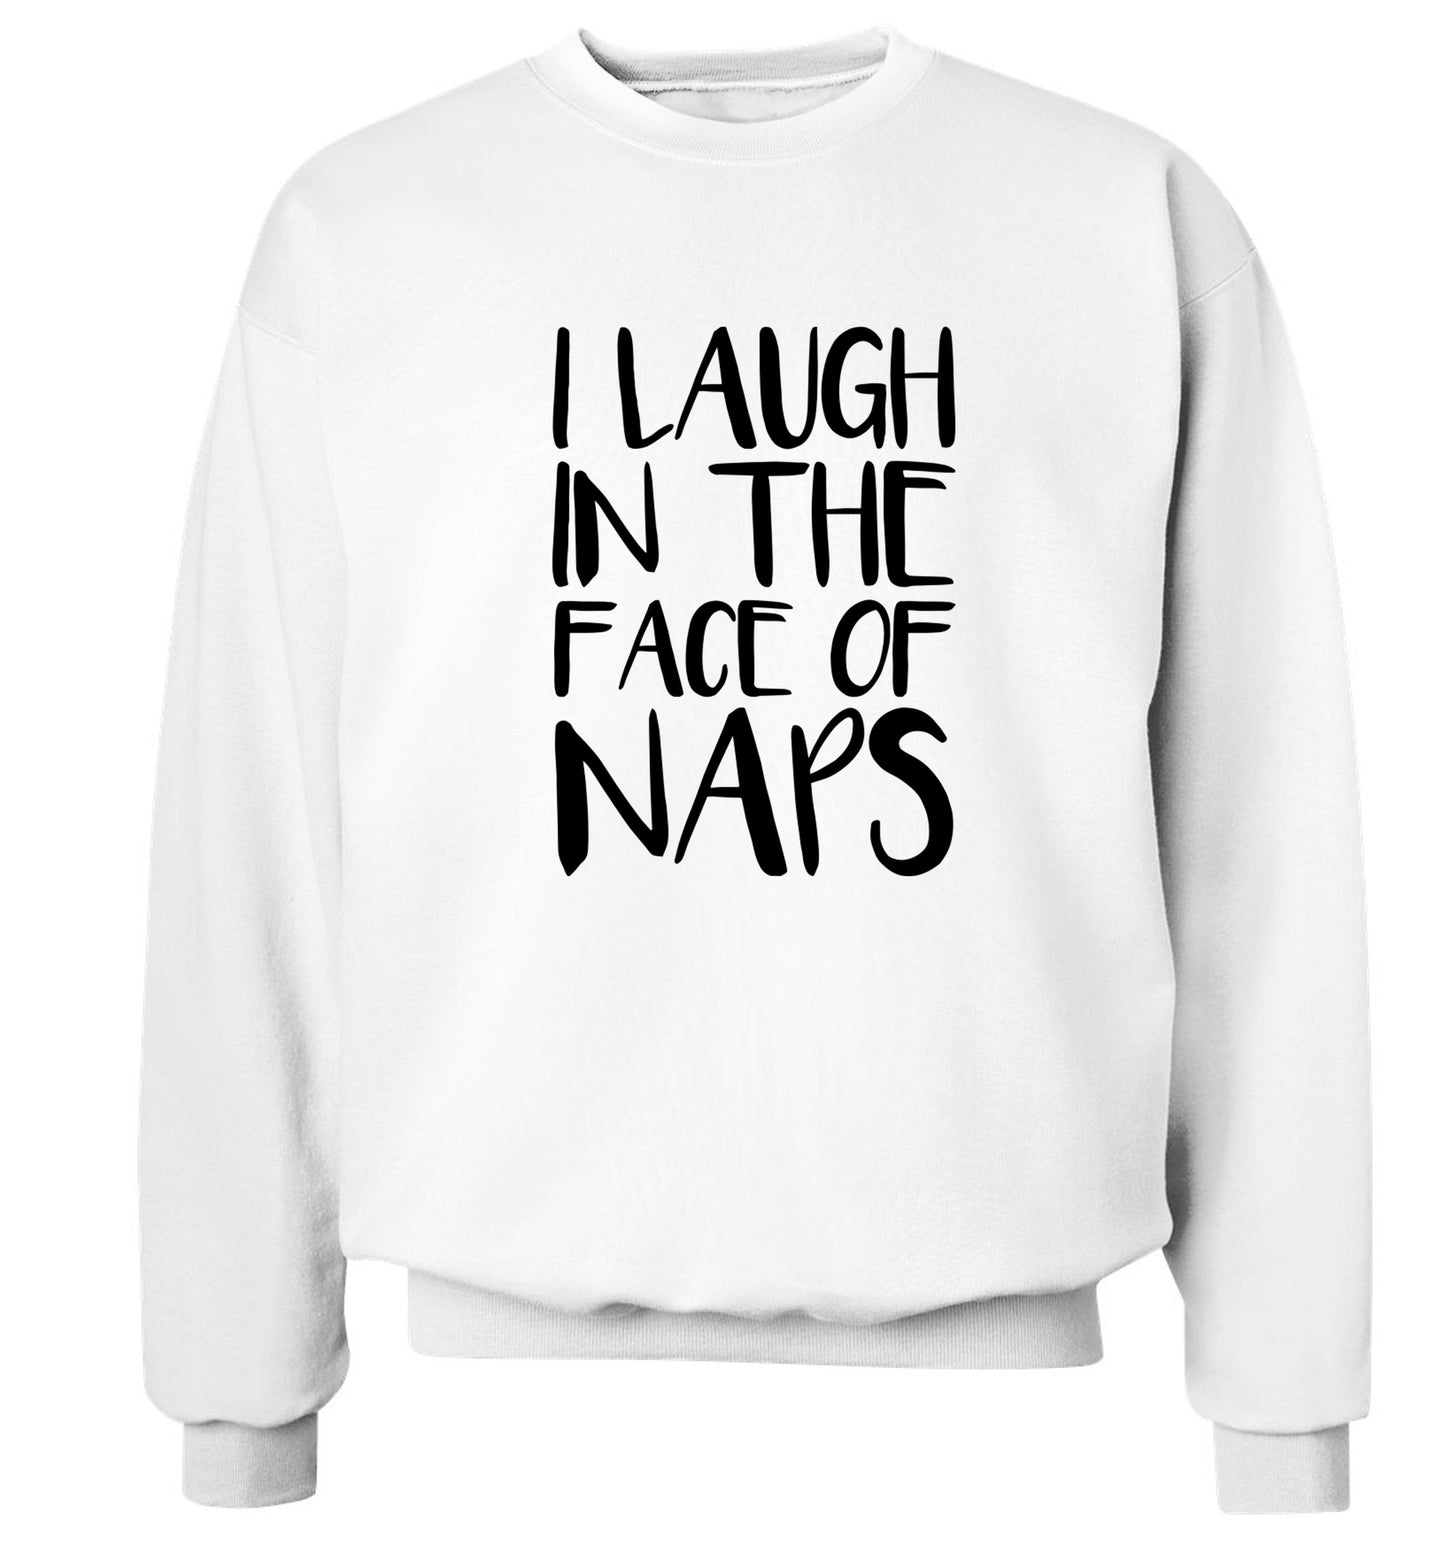 I laugh in the face of naps Adult's unisex white Sweater 2XL